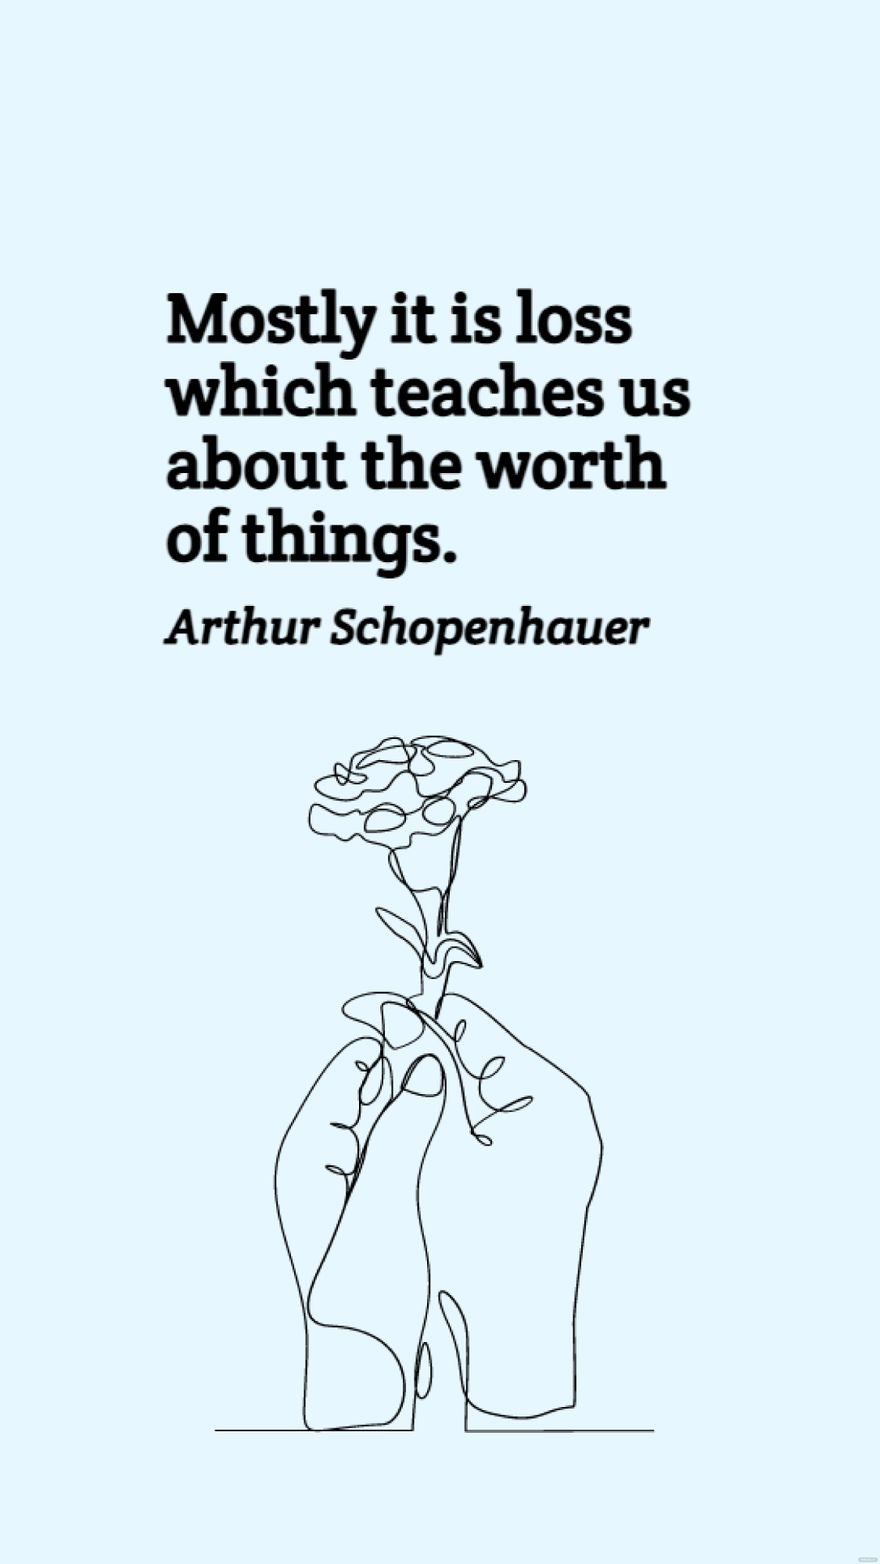 Free Arthur Schopenhauer - Mostly it is loss which teaches us about the worth of things.